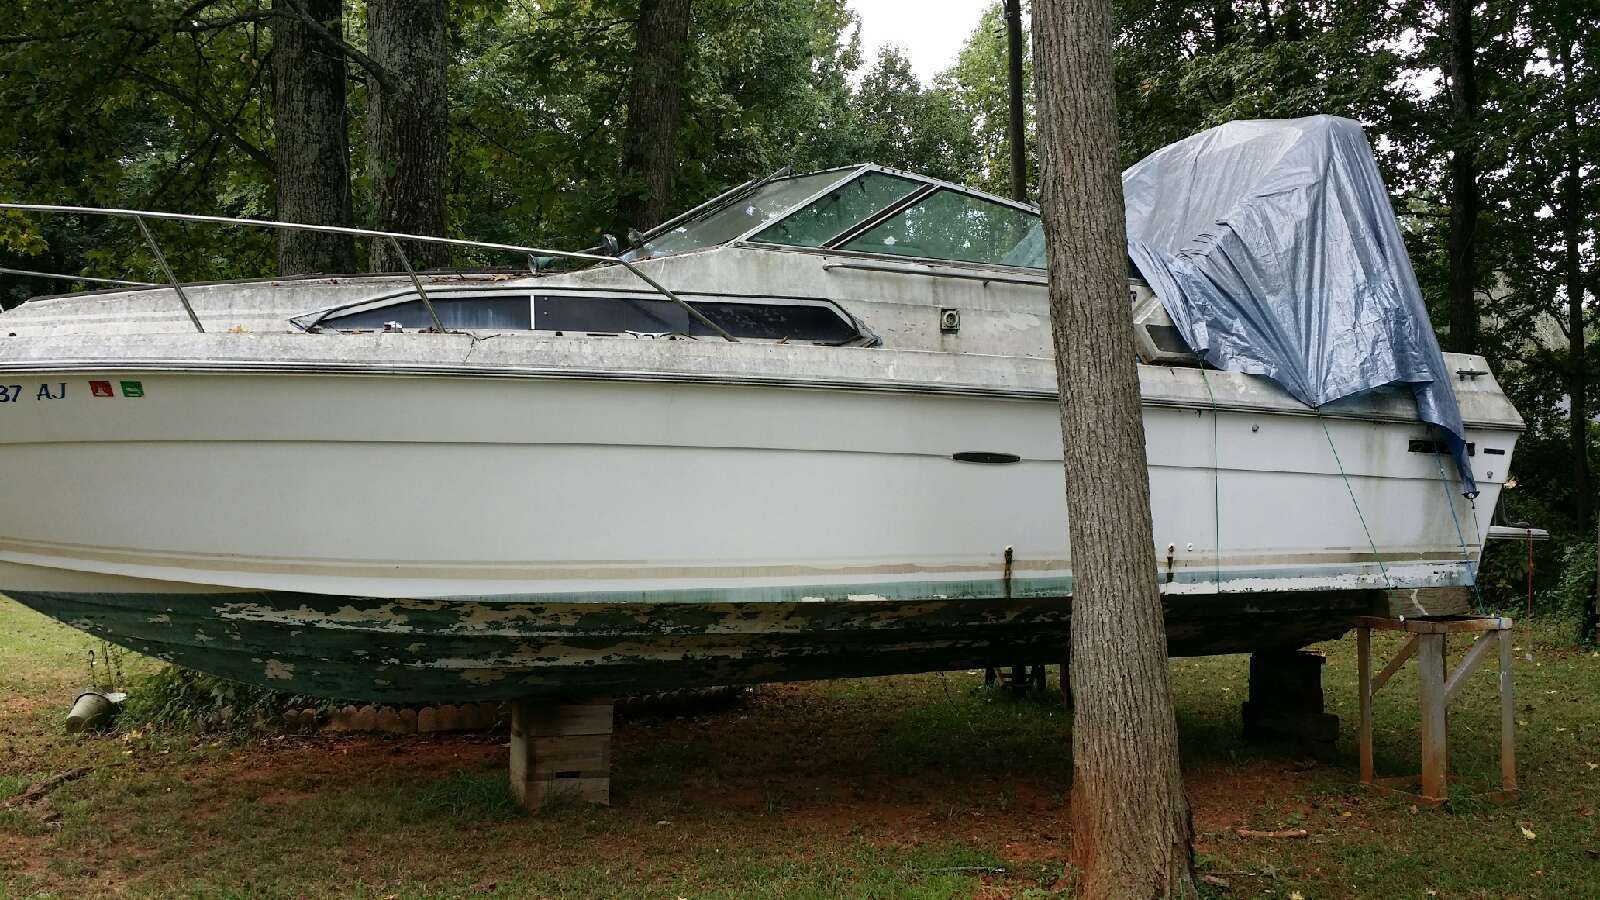 Sea Ray Sundancer NEED TO SELL ASAP! OFFER ME A PRICE AND YOU MAY BE LUCKY!